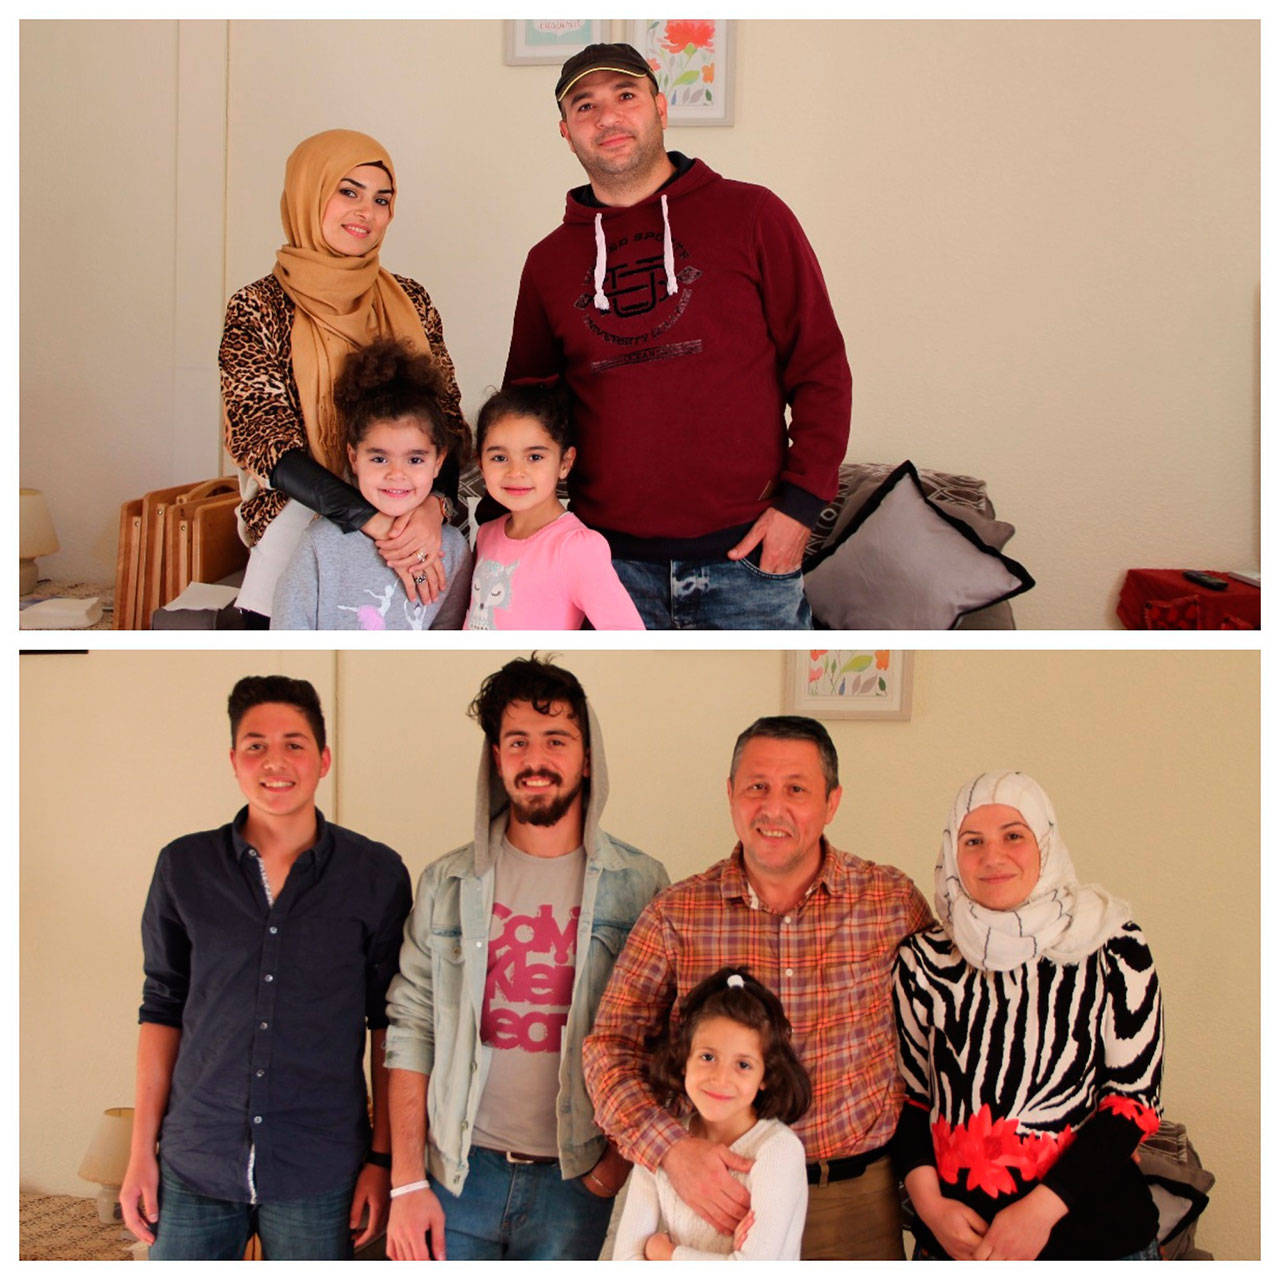 Top: The Alati family: Safa Jneidi (back left), her husband Iyad Alati (back right) and their daughters JuJu, 4 (front left), and Huda, 6 (front right).                                Bottom: The Al-Salkini family left to right: Brothers Nabil Al-Salkini and Yazan Al-Salkini, their father Mohamed Raed, his wife Nahed and daughter Rawan (front). Not pictured: Mohamed and Nahed’s daughter Noura. (Anneli Fogt/Staff Photos)